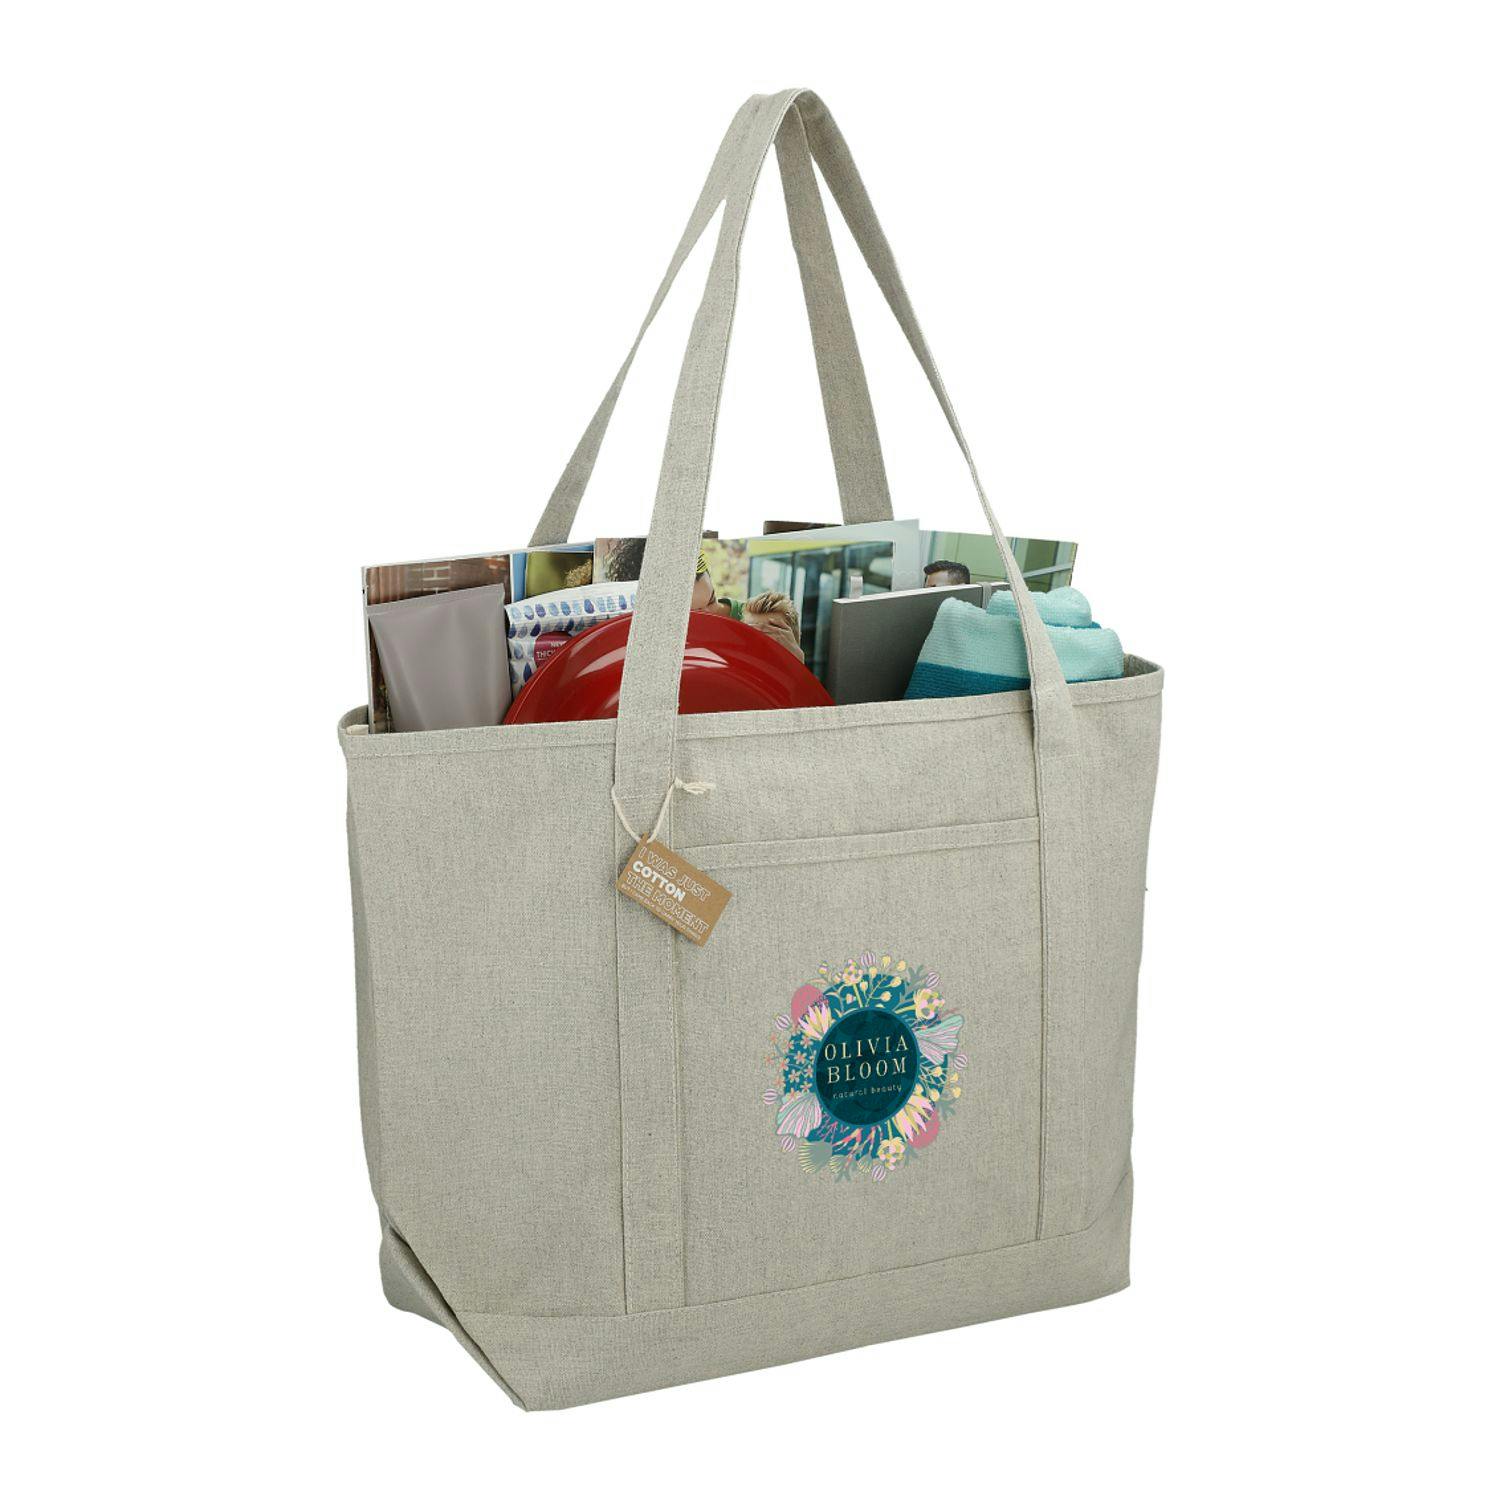 Repose 10oz Recycled Cotton Boat Tote - additional Image 5